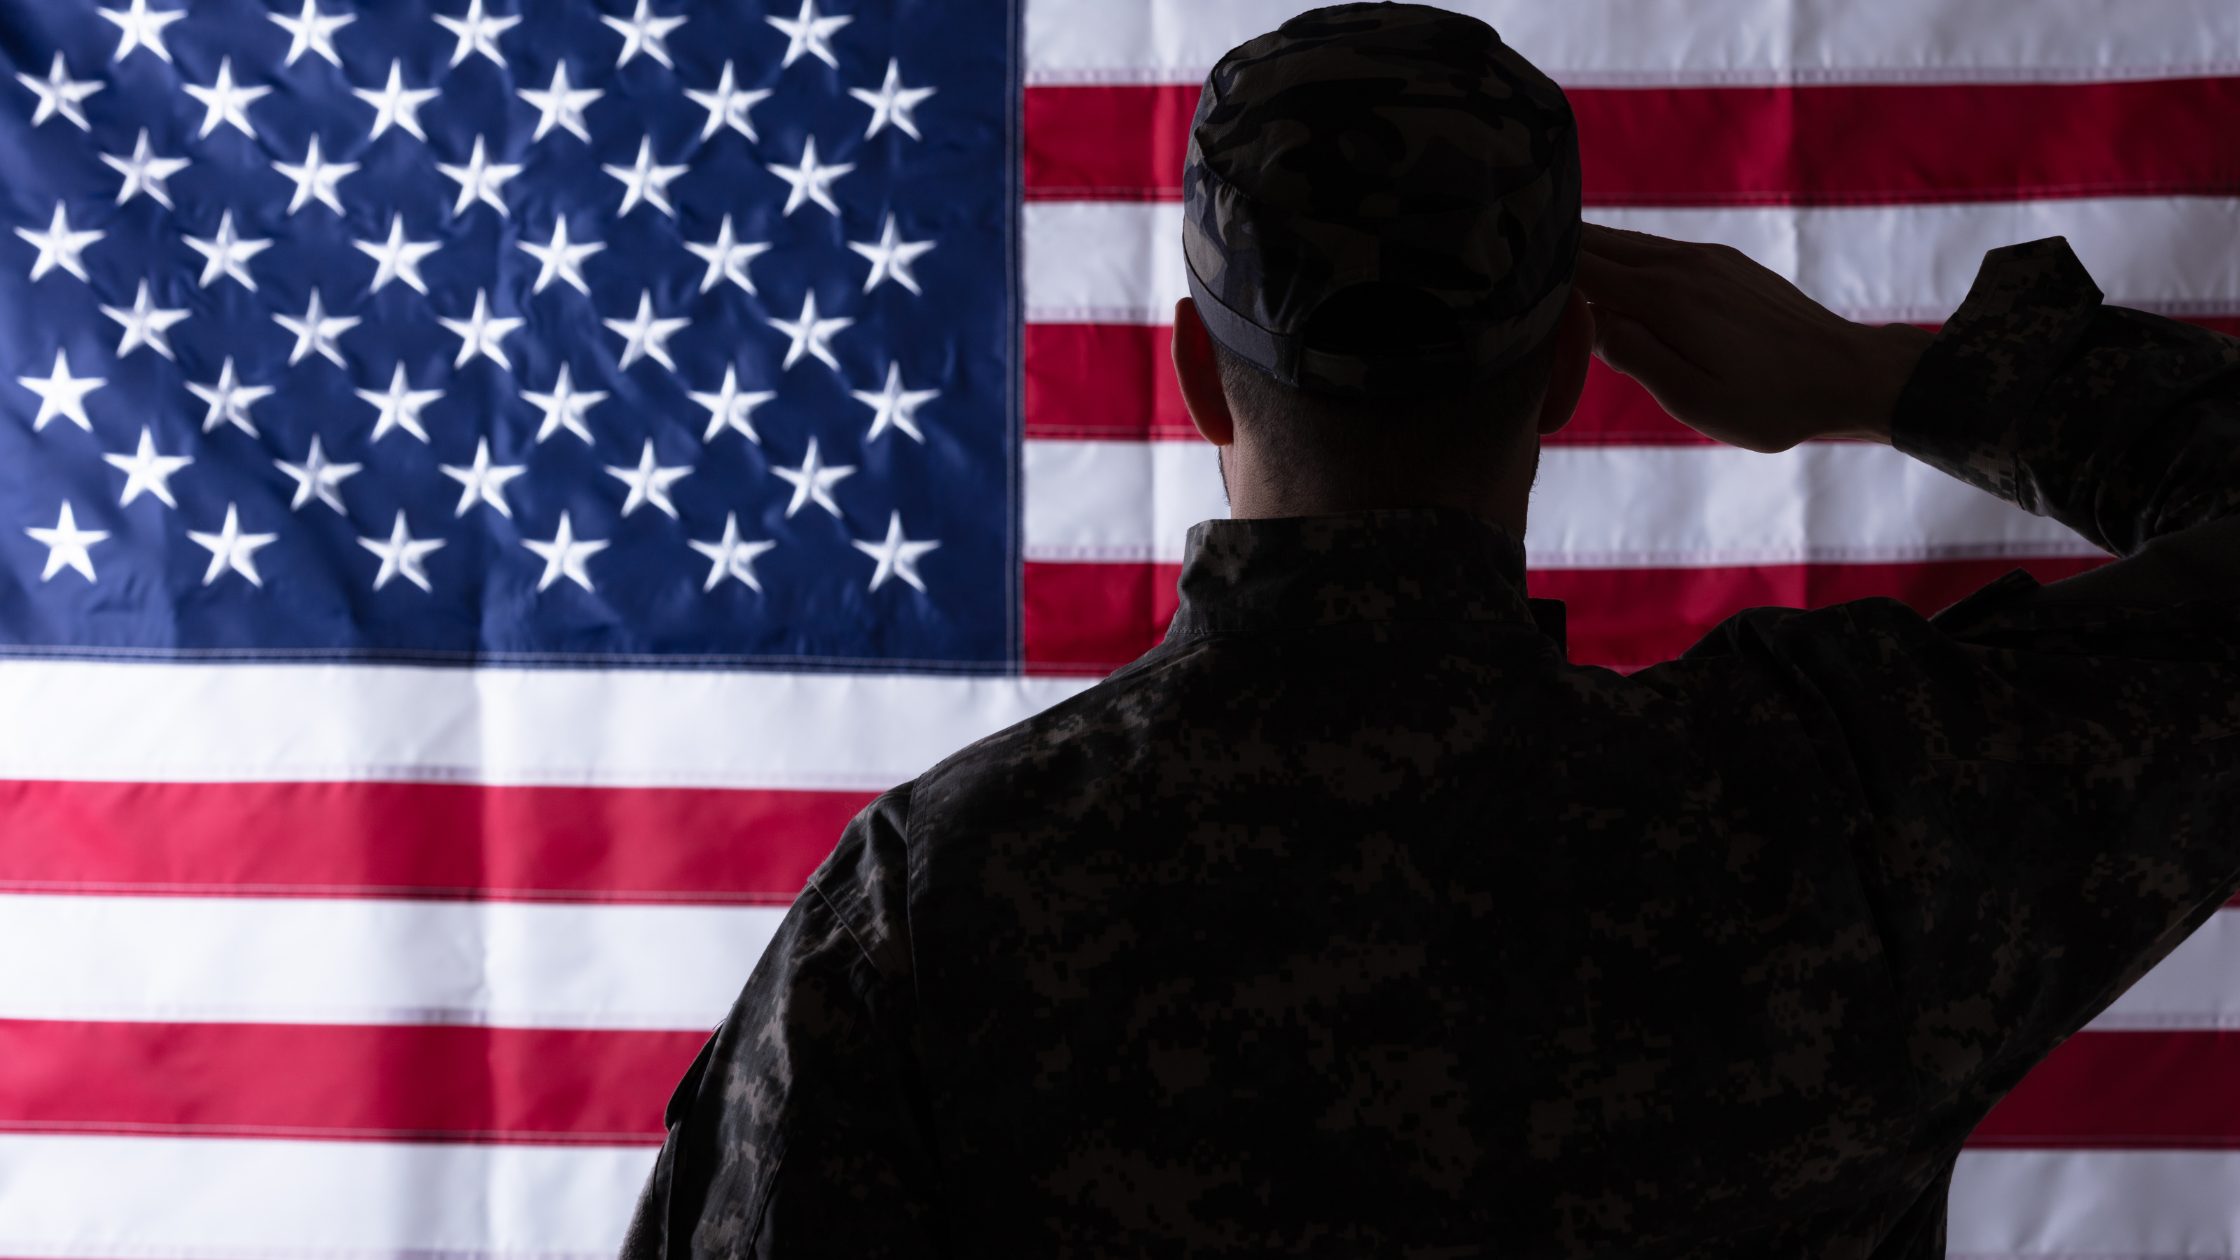 Silhouette of military man saluting in front of the American flag.